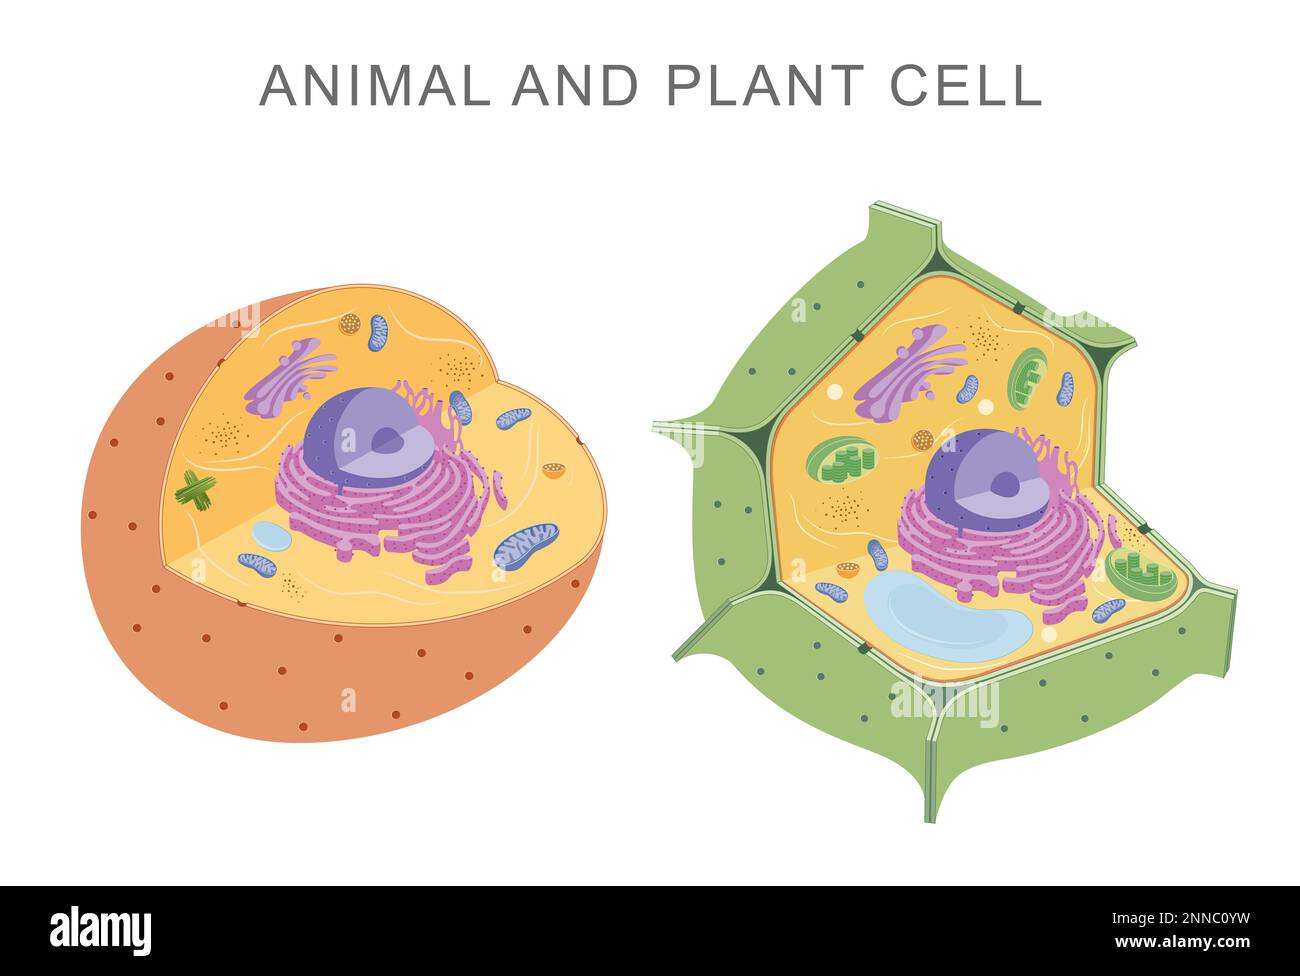 Comparing animal and plant cells Stock Photo